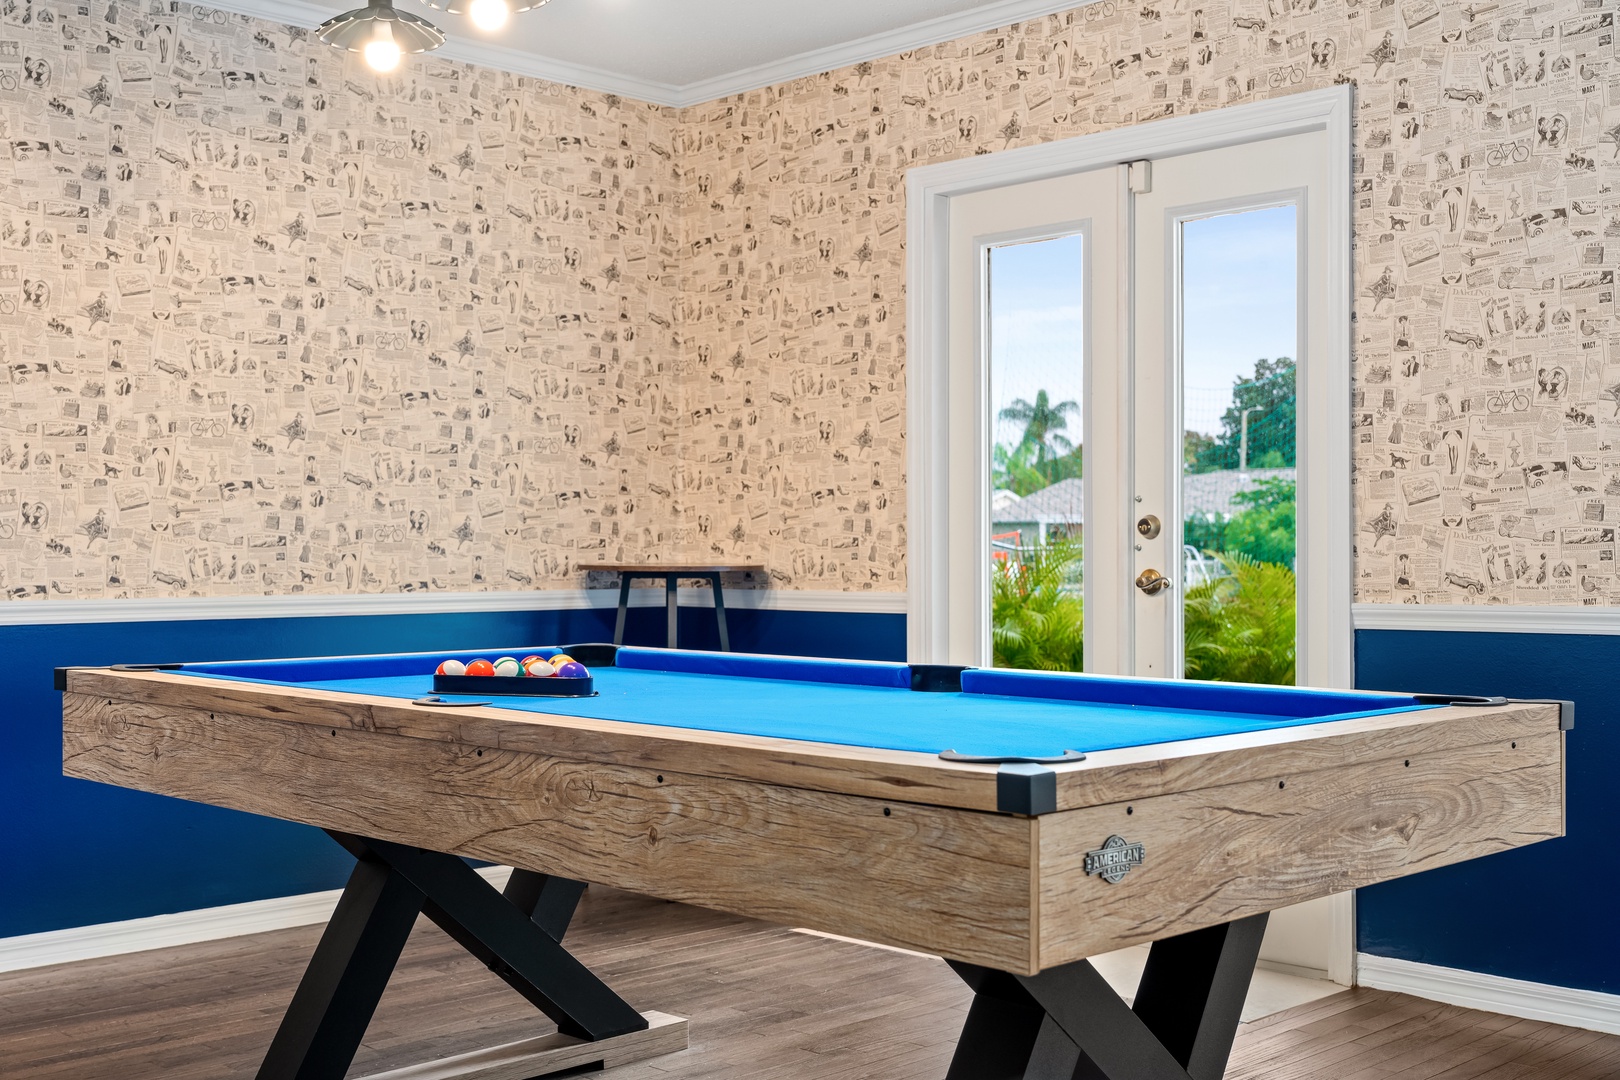 Whether you prefer pool, cards, or video games – this home has it all! #GameOn